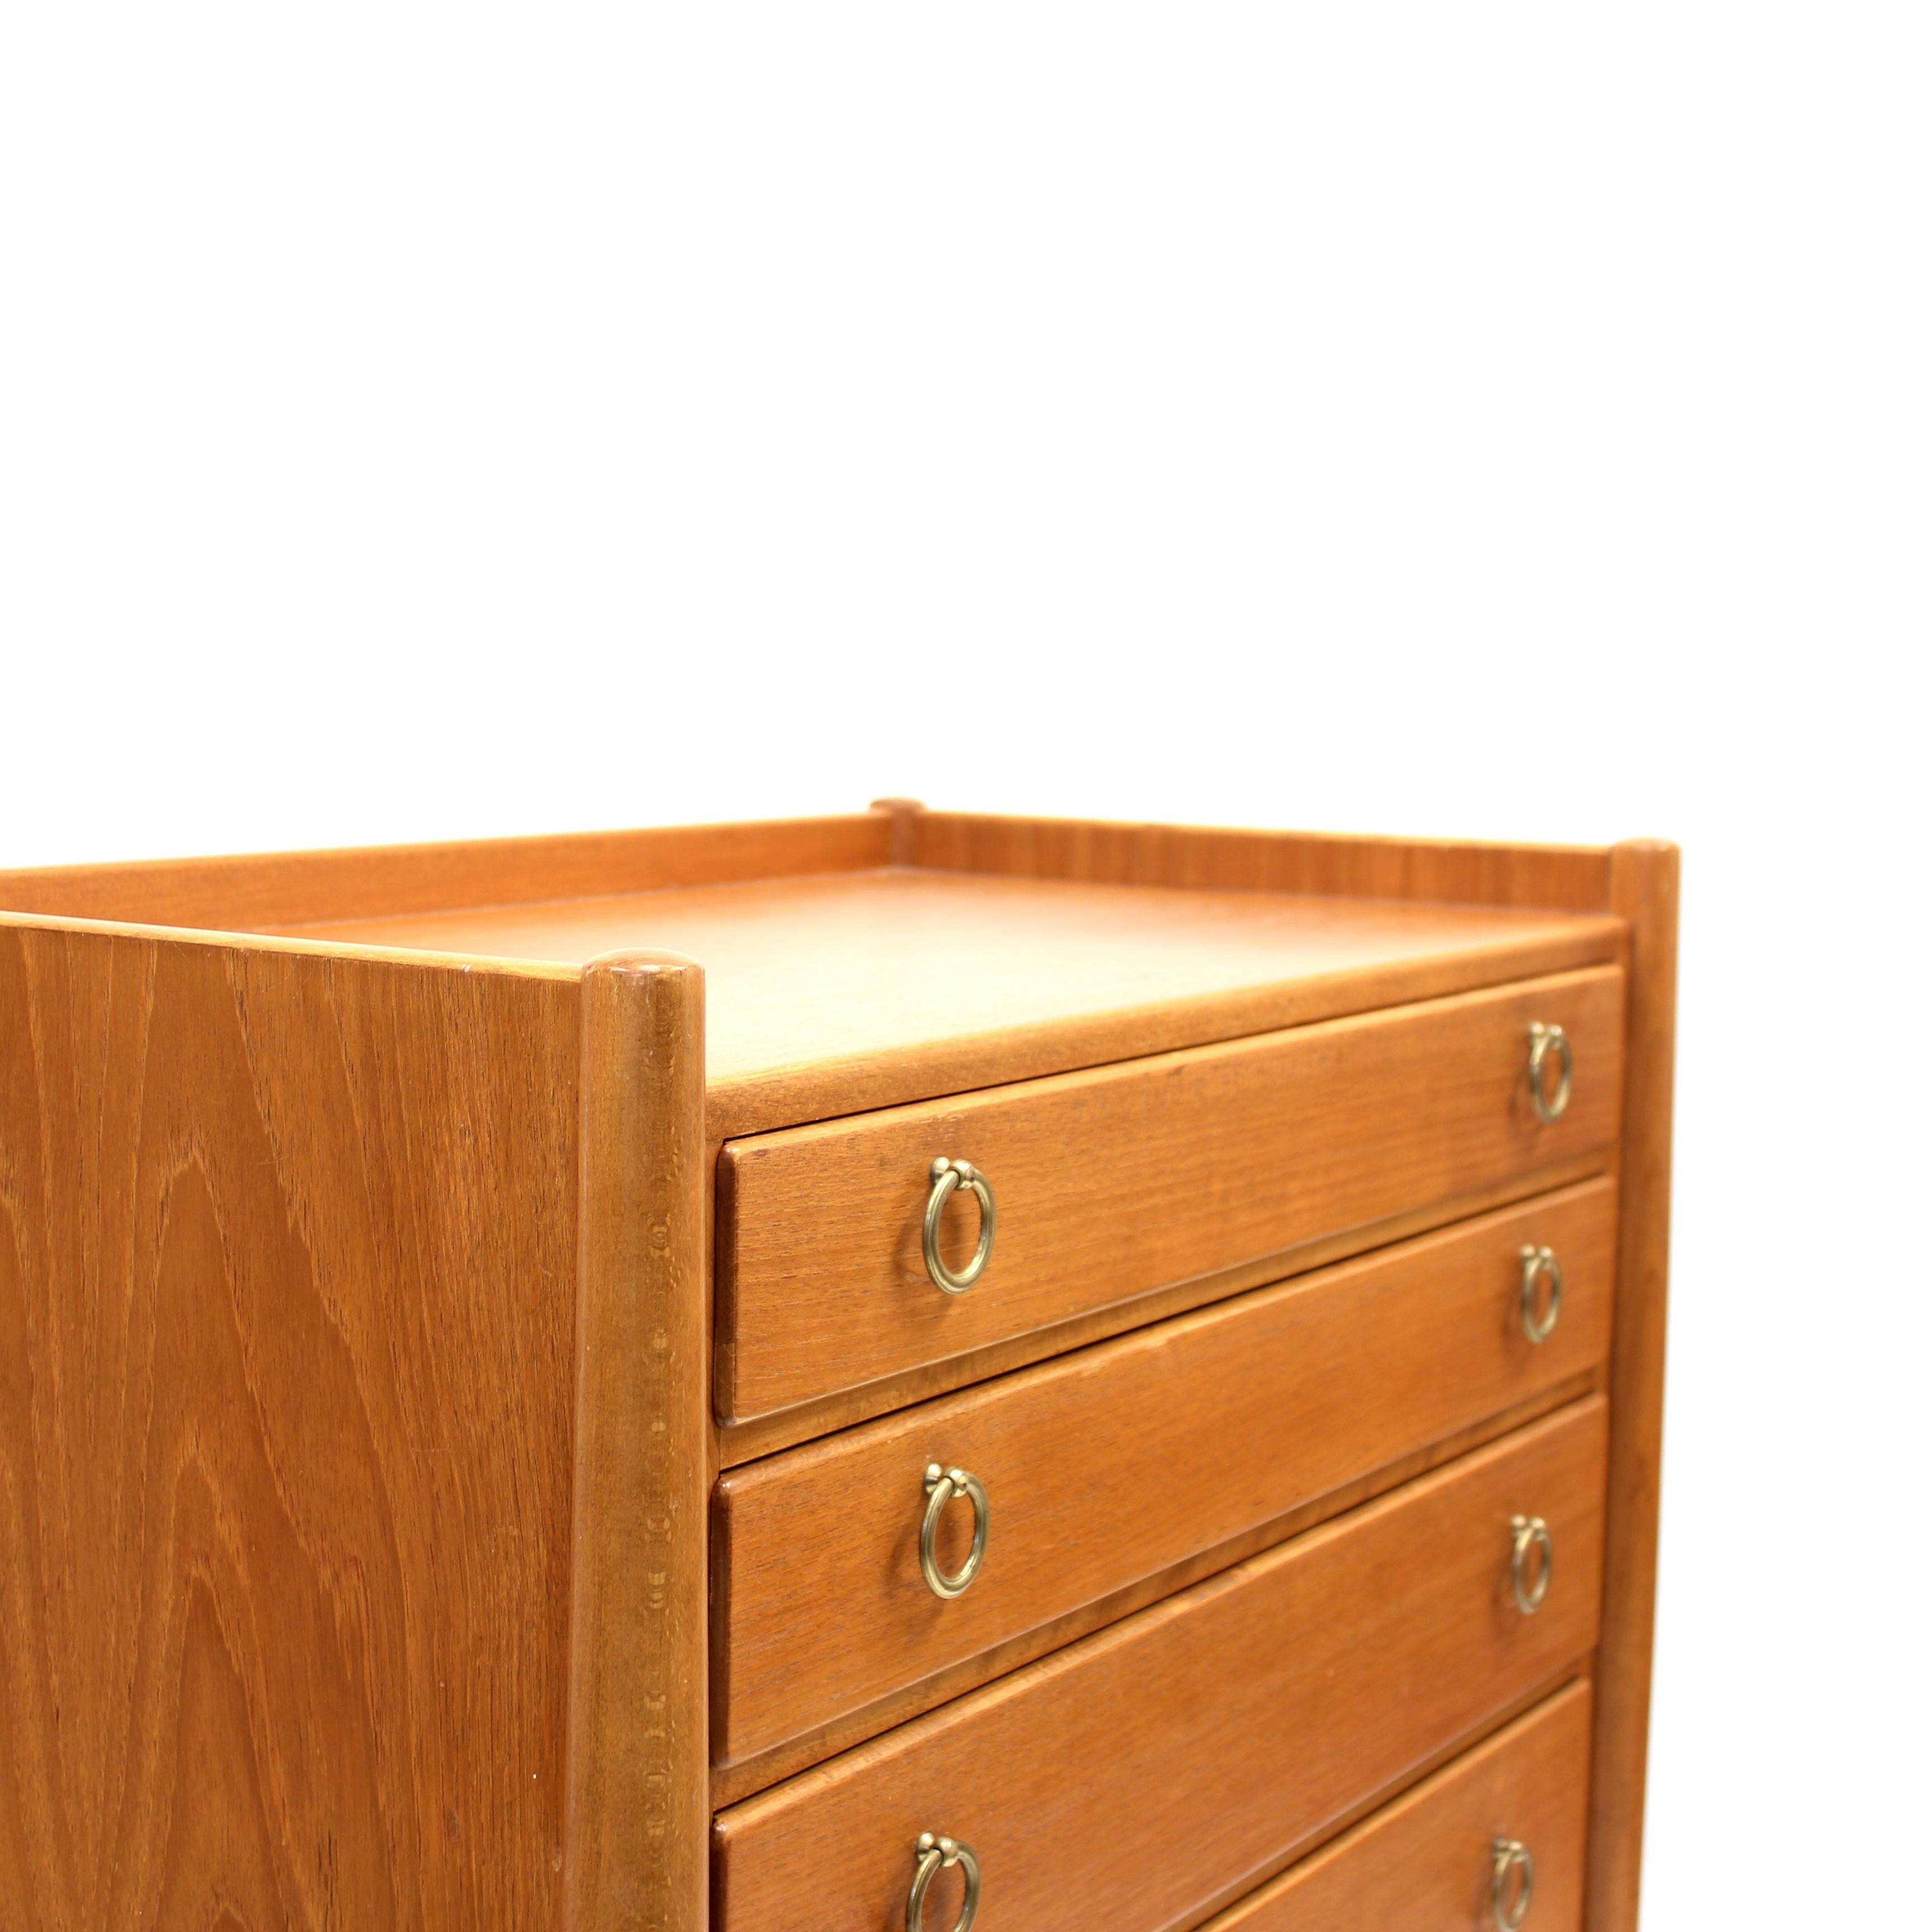 Swedish Mid-Century Teak Chest of Drawers by Treman, 1960s For Sale 4